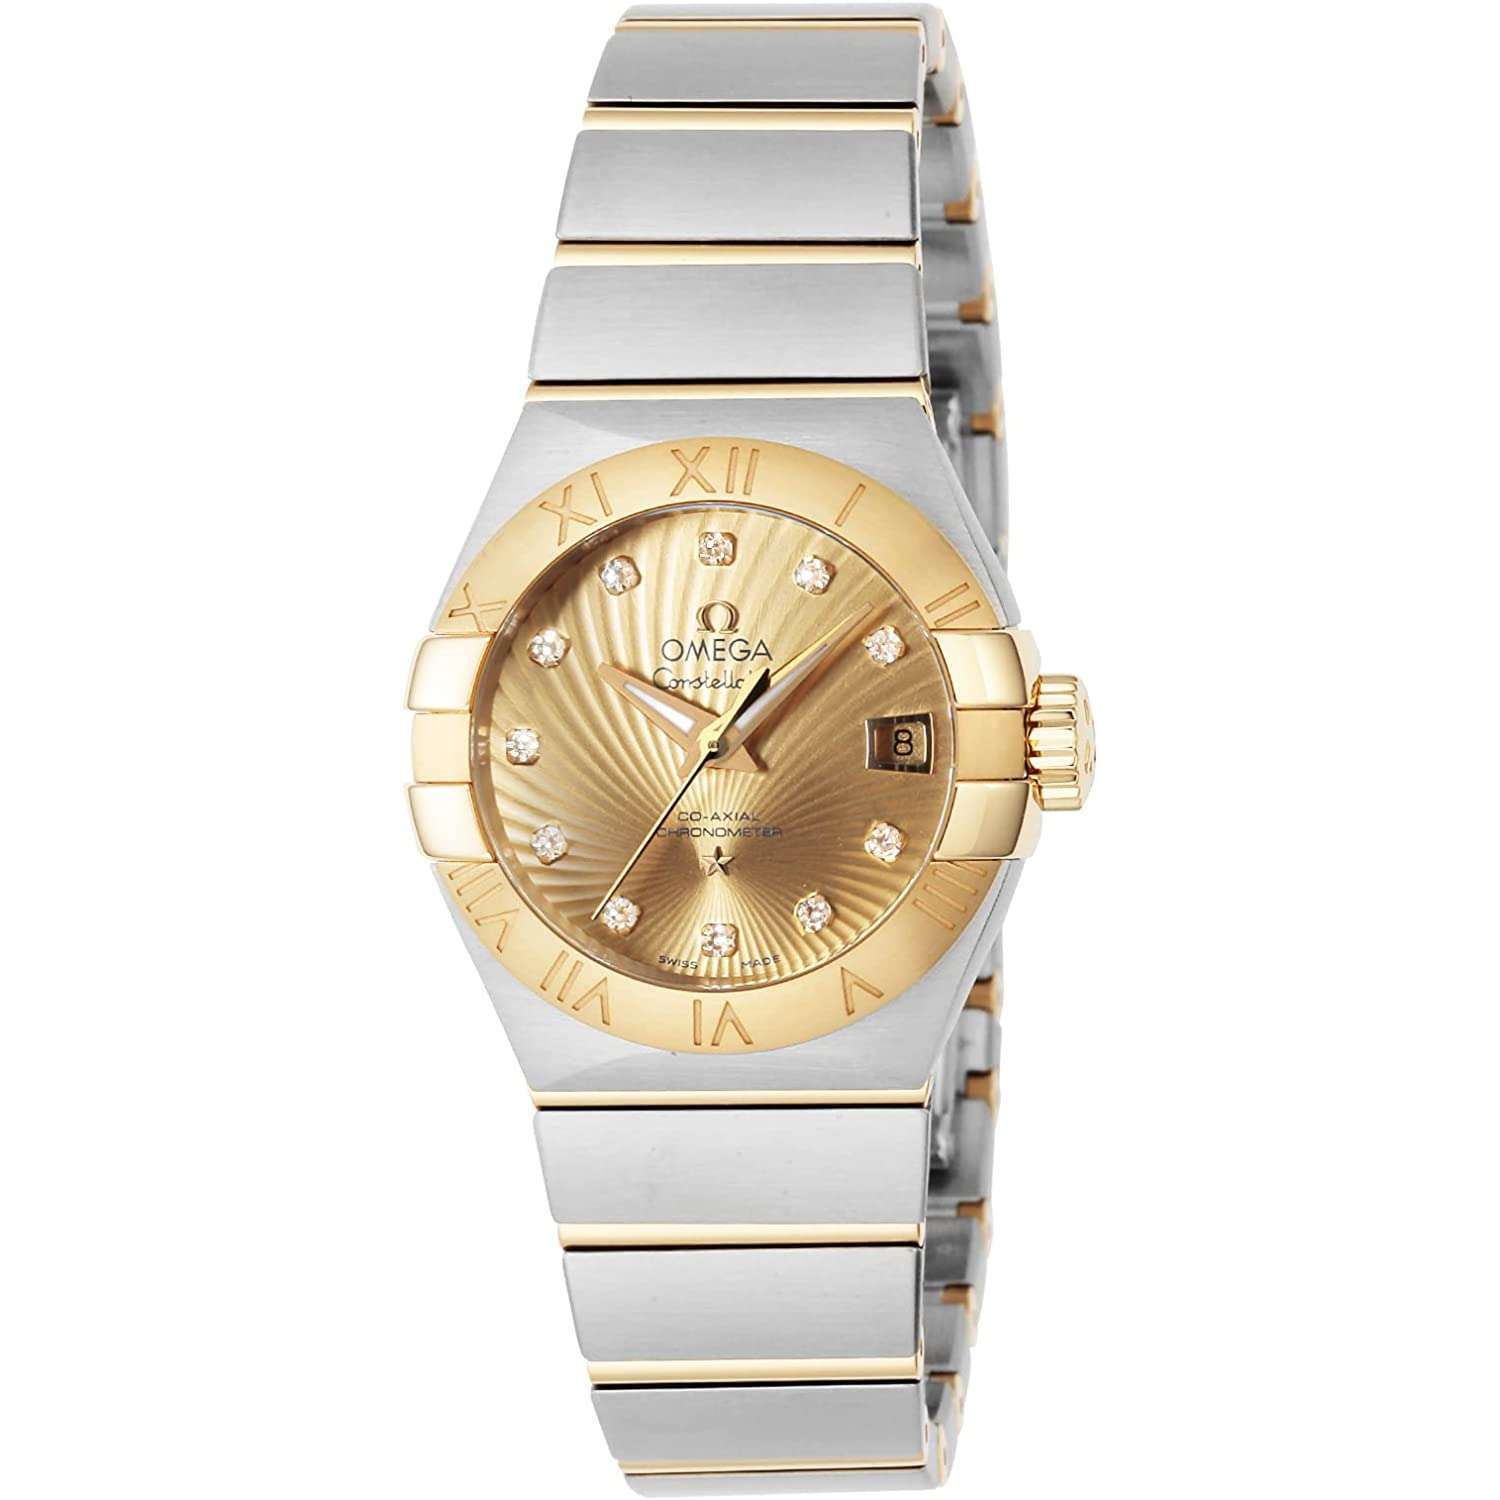 ROOK JAPAN:OMEGA CONSTELLATION CO-AXIAL CHRONOMETER 26.5 MM WOMEN WATCH 123.20.27.20.58.001,Luxury Watch,Omega